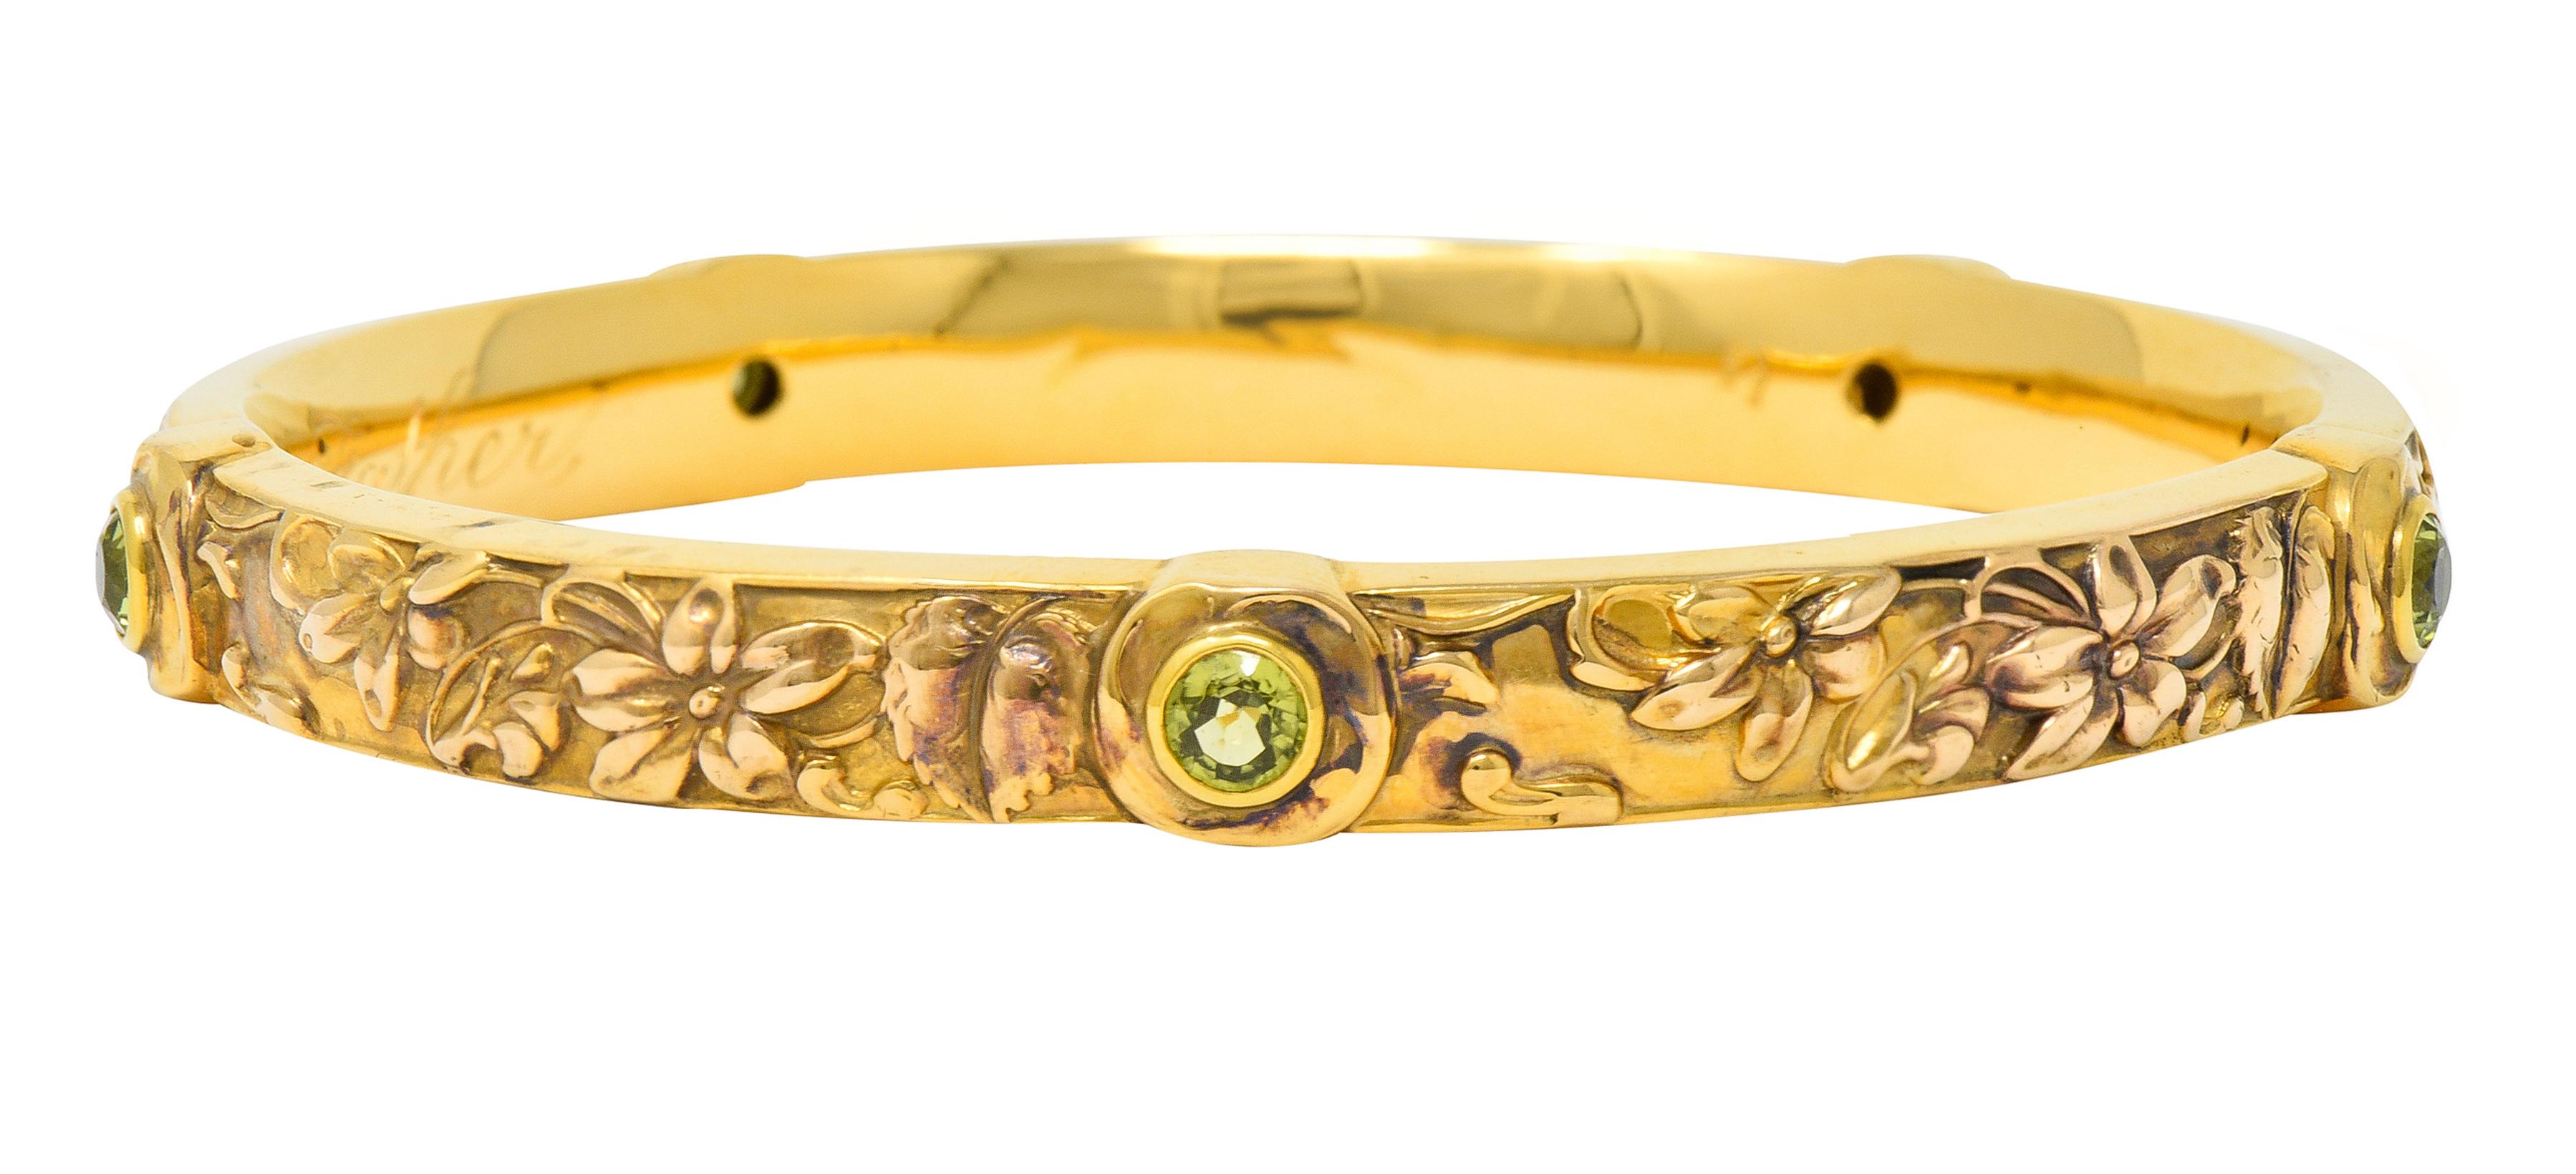 Bangle style bracelet features highly rendered repoussè floral imagery

With five gemstone stations bezel set with round cut peridot weighing in total approximately 1.90 carats

Very well-matched and bright yellowish-green in color

With loving